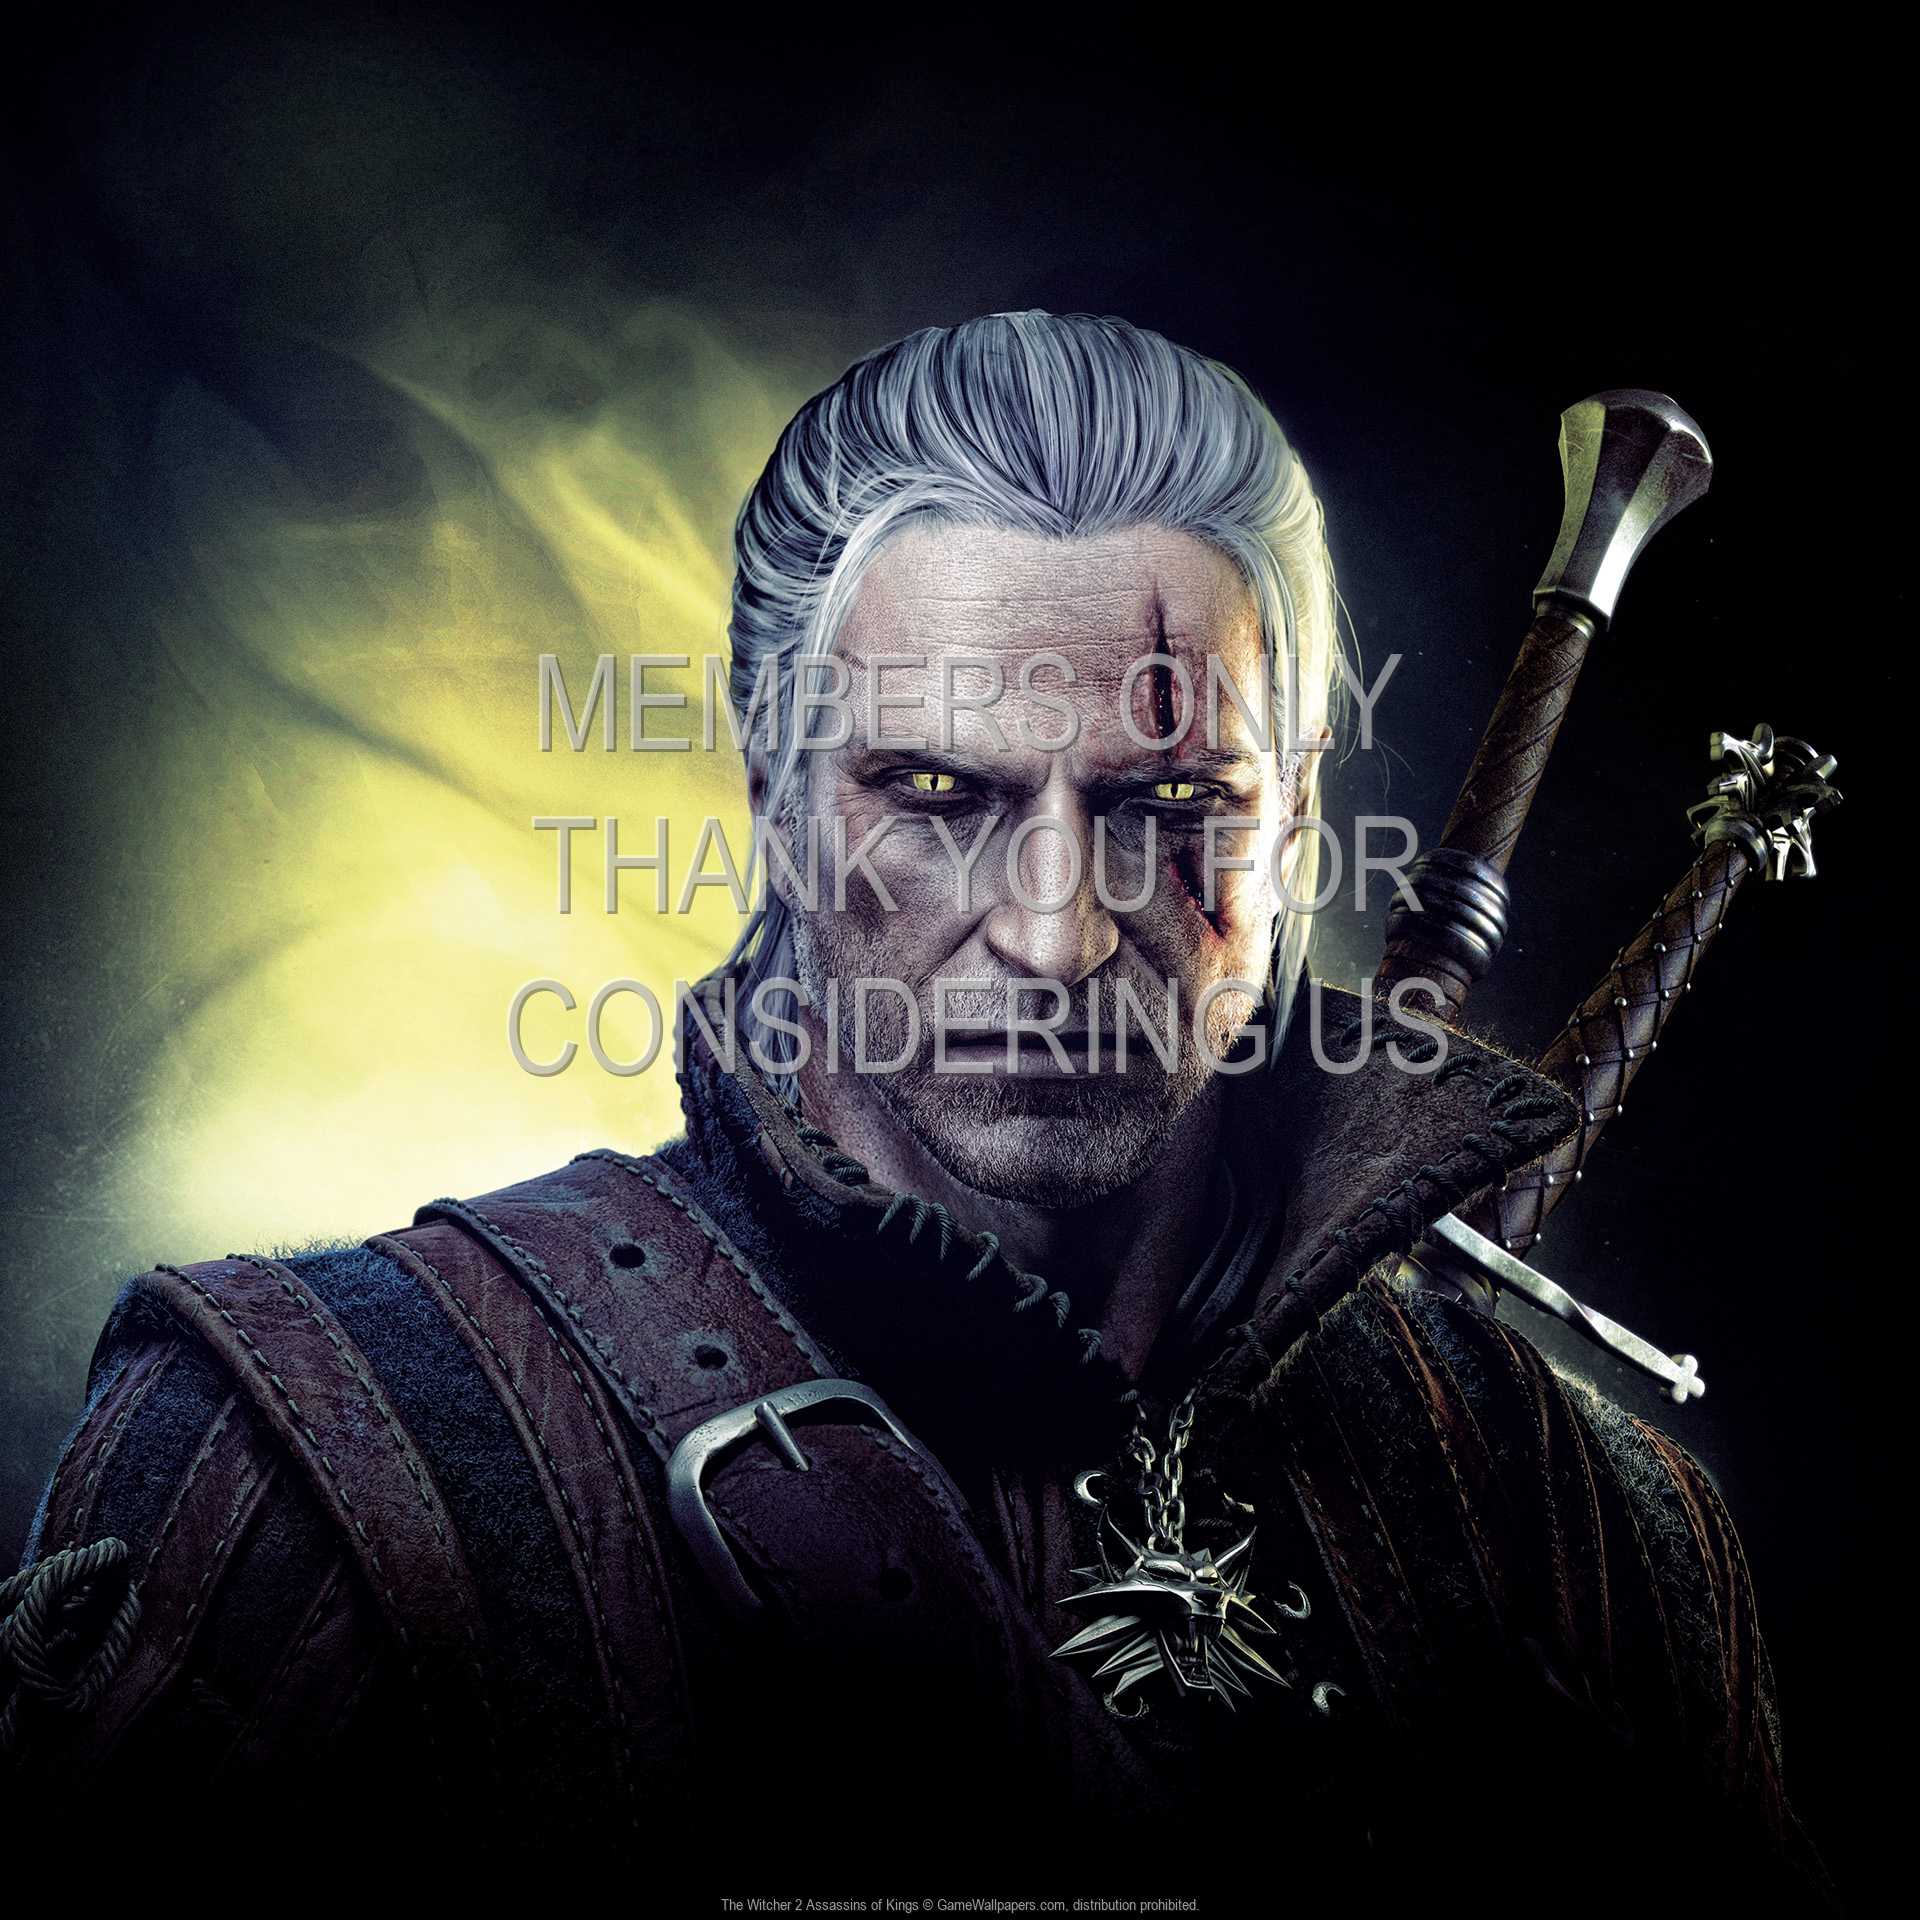 The Witcher 2: Assassins of Kings 1080p Horizontal Mobile wallpaper or background 09